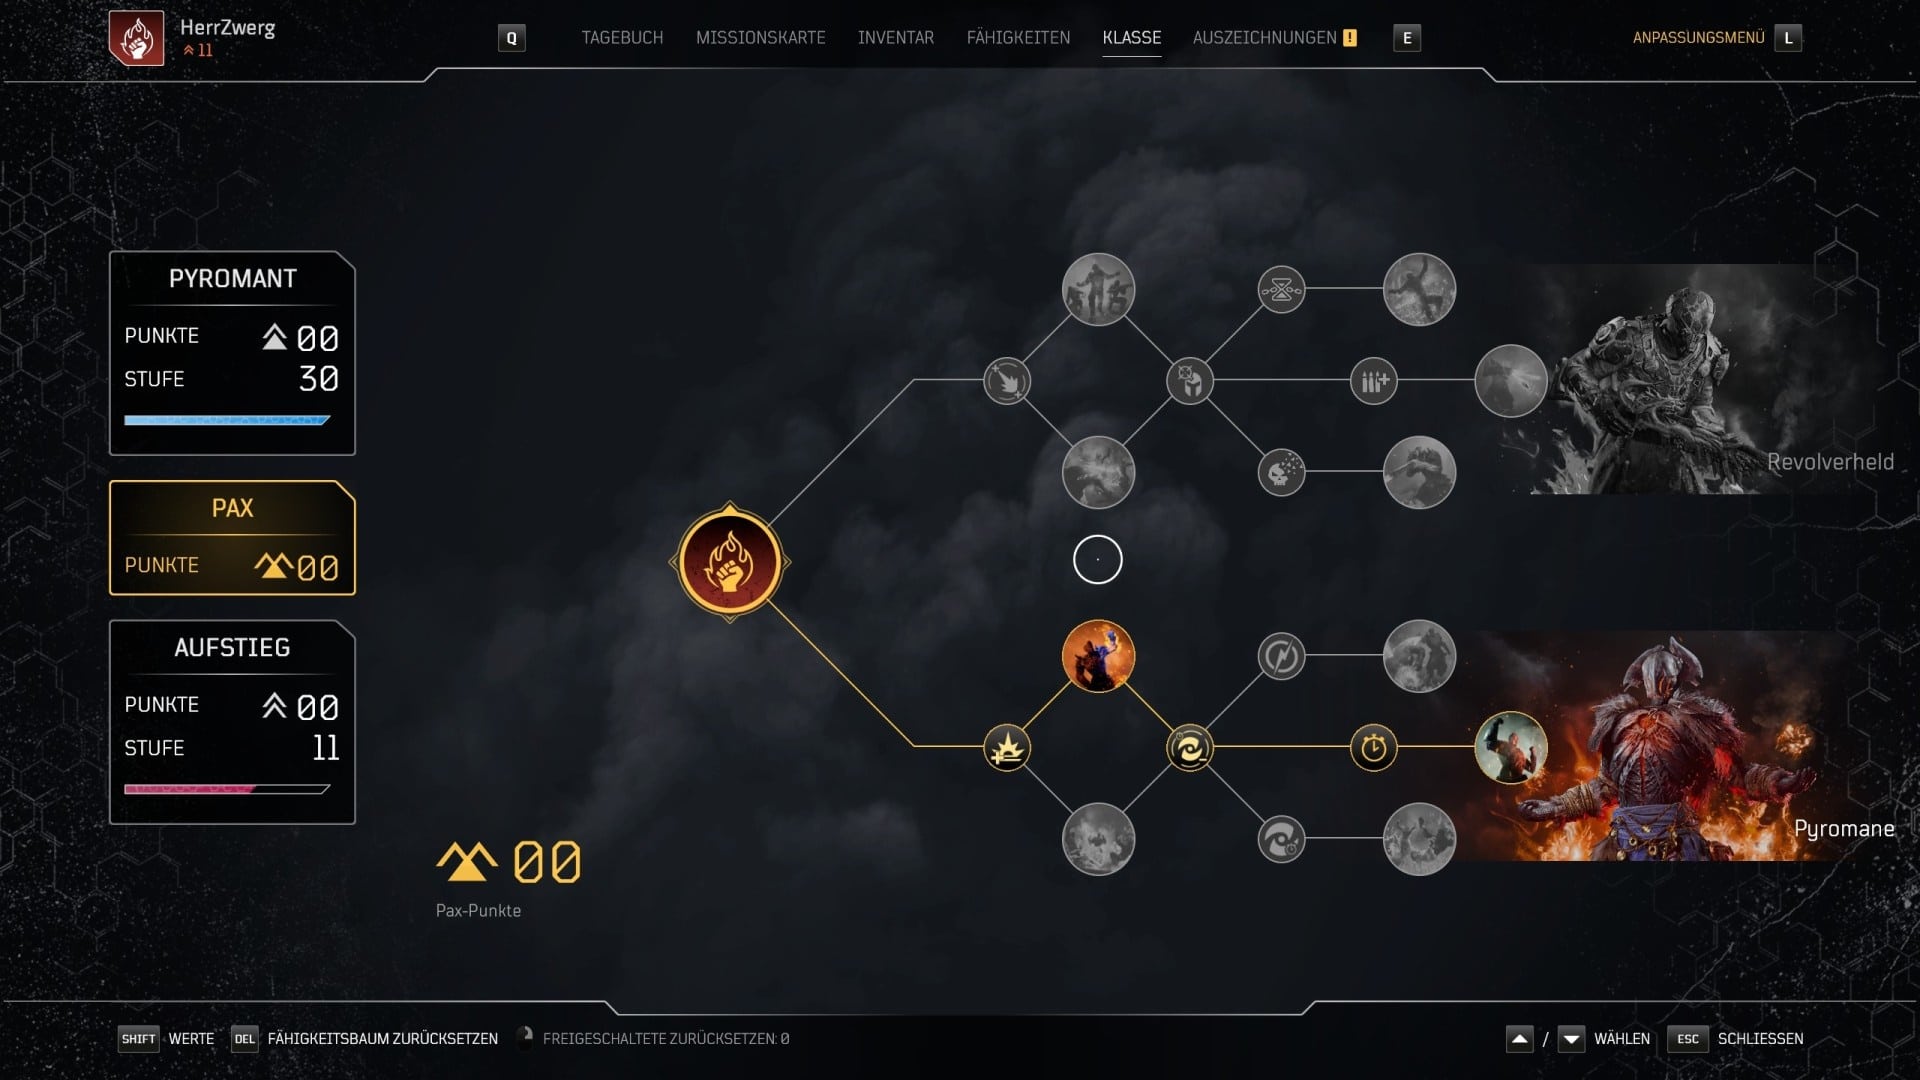 (The Pax talent tree grants you powerful bonuses. Each Perk strengthens your character significantly.)